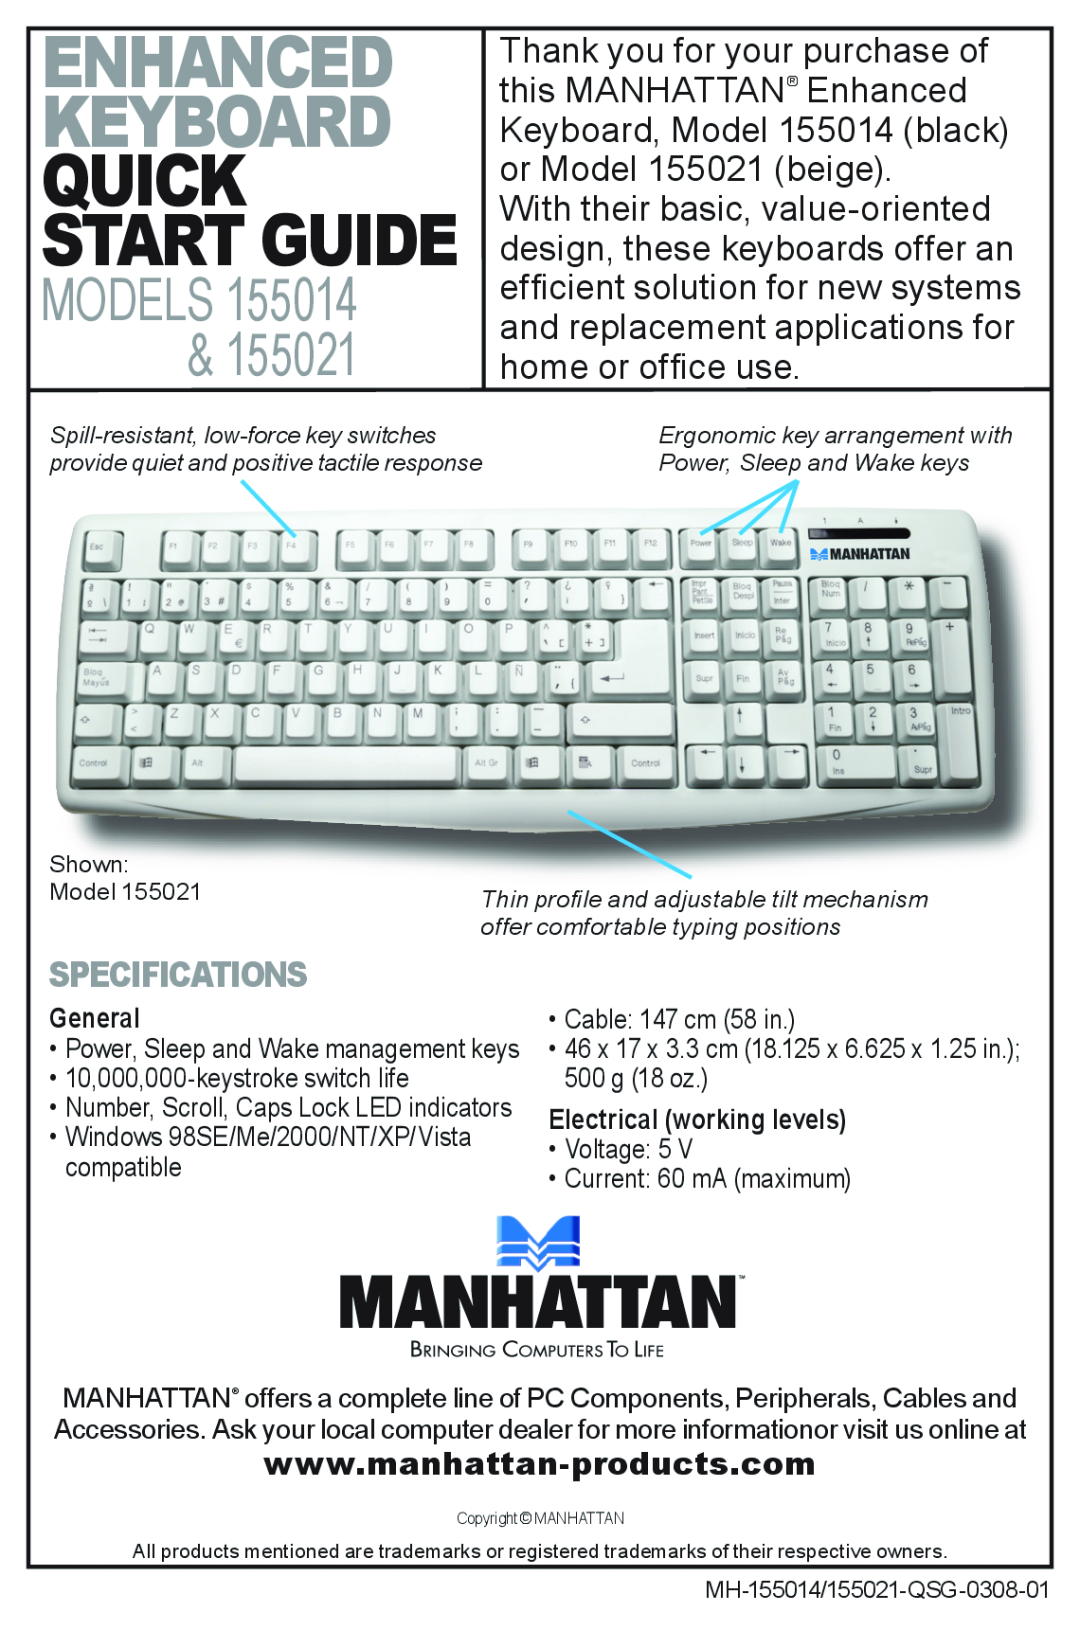 Manhattan Computer Products 155014 quick start Enhanced Keyboard, Quick Start Guide, Models, specifications 